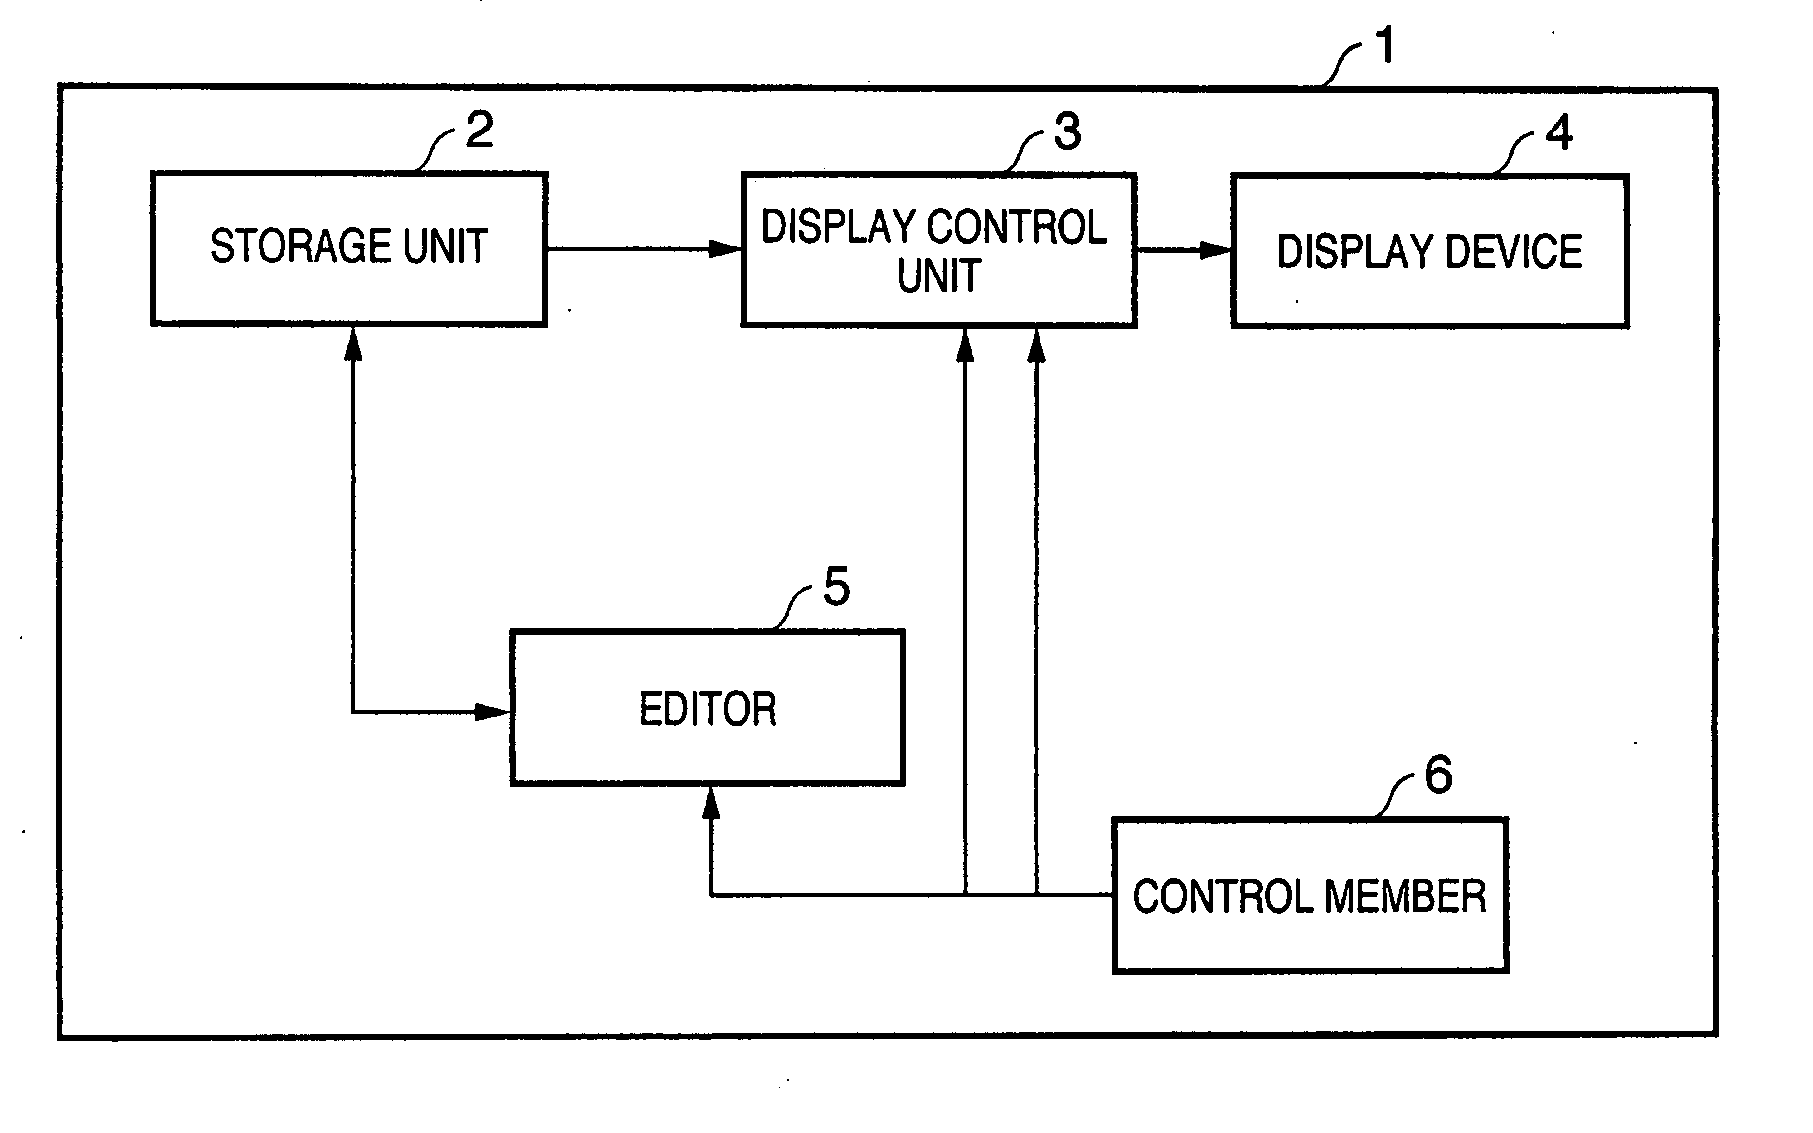 Electronic device capable of displaying an instruction manual